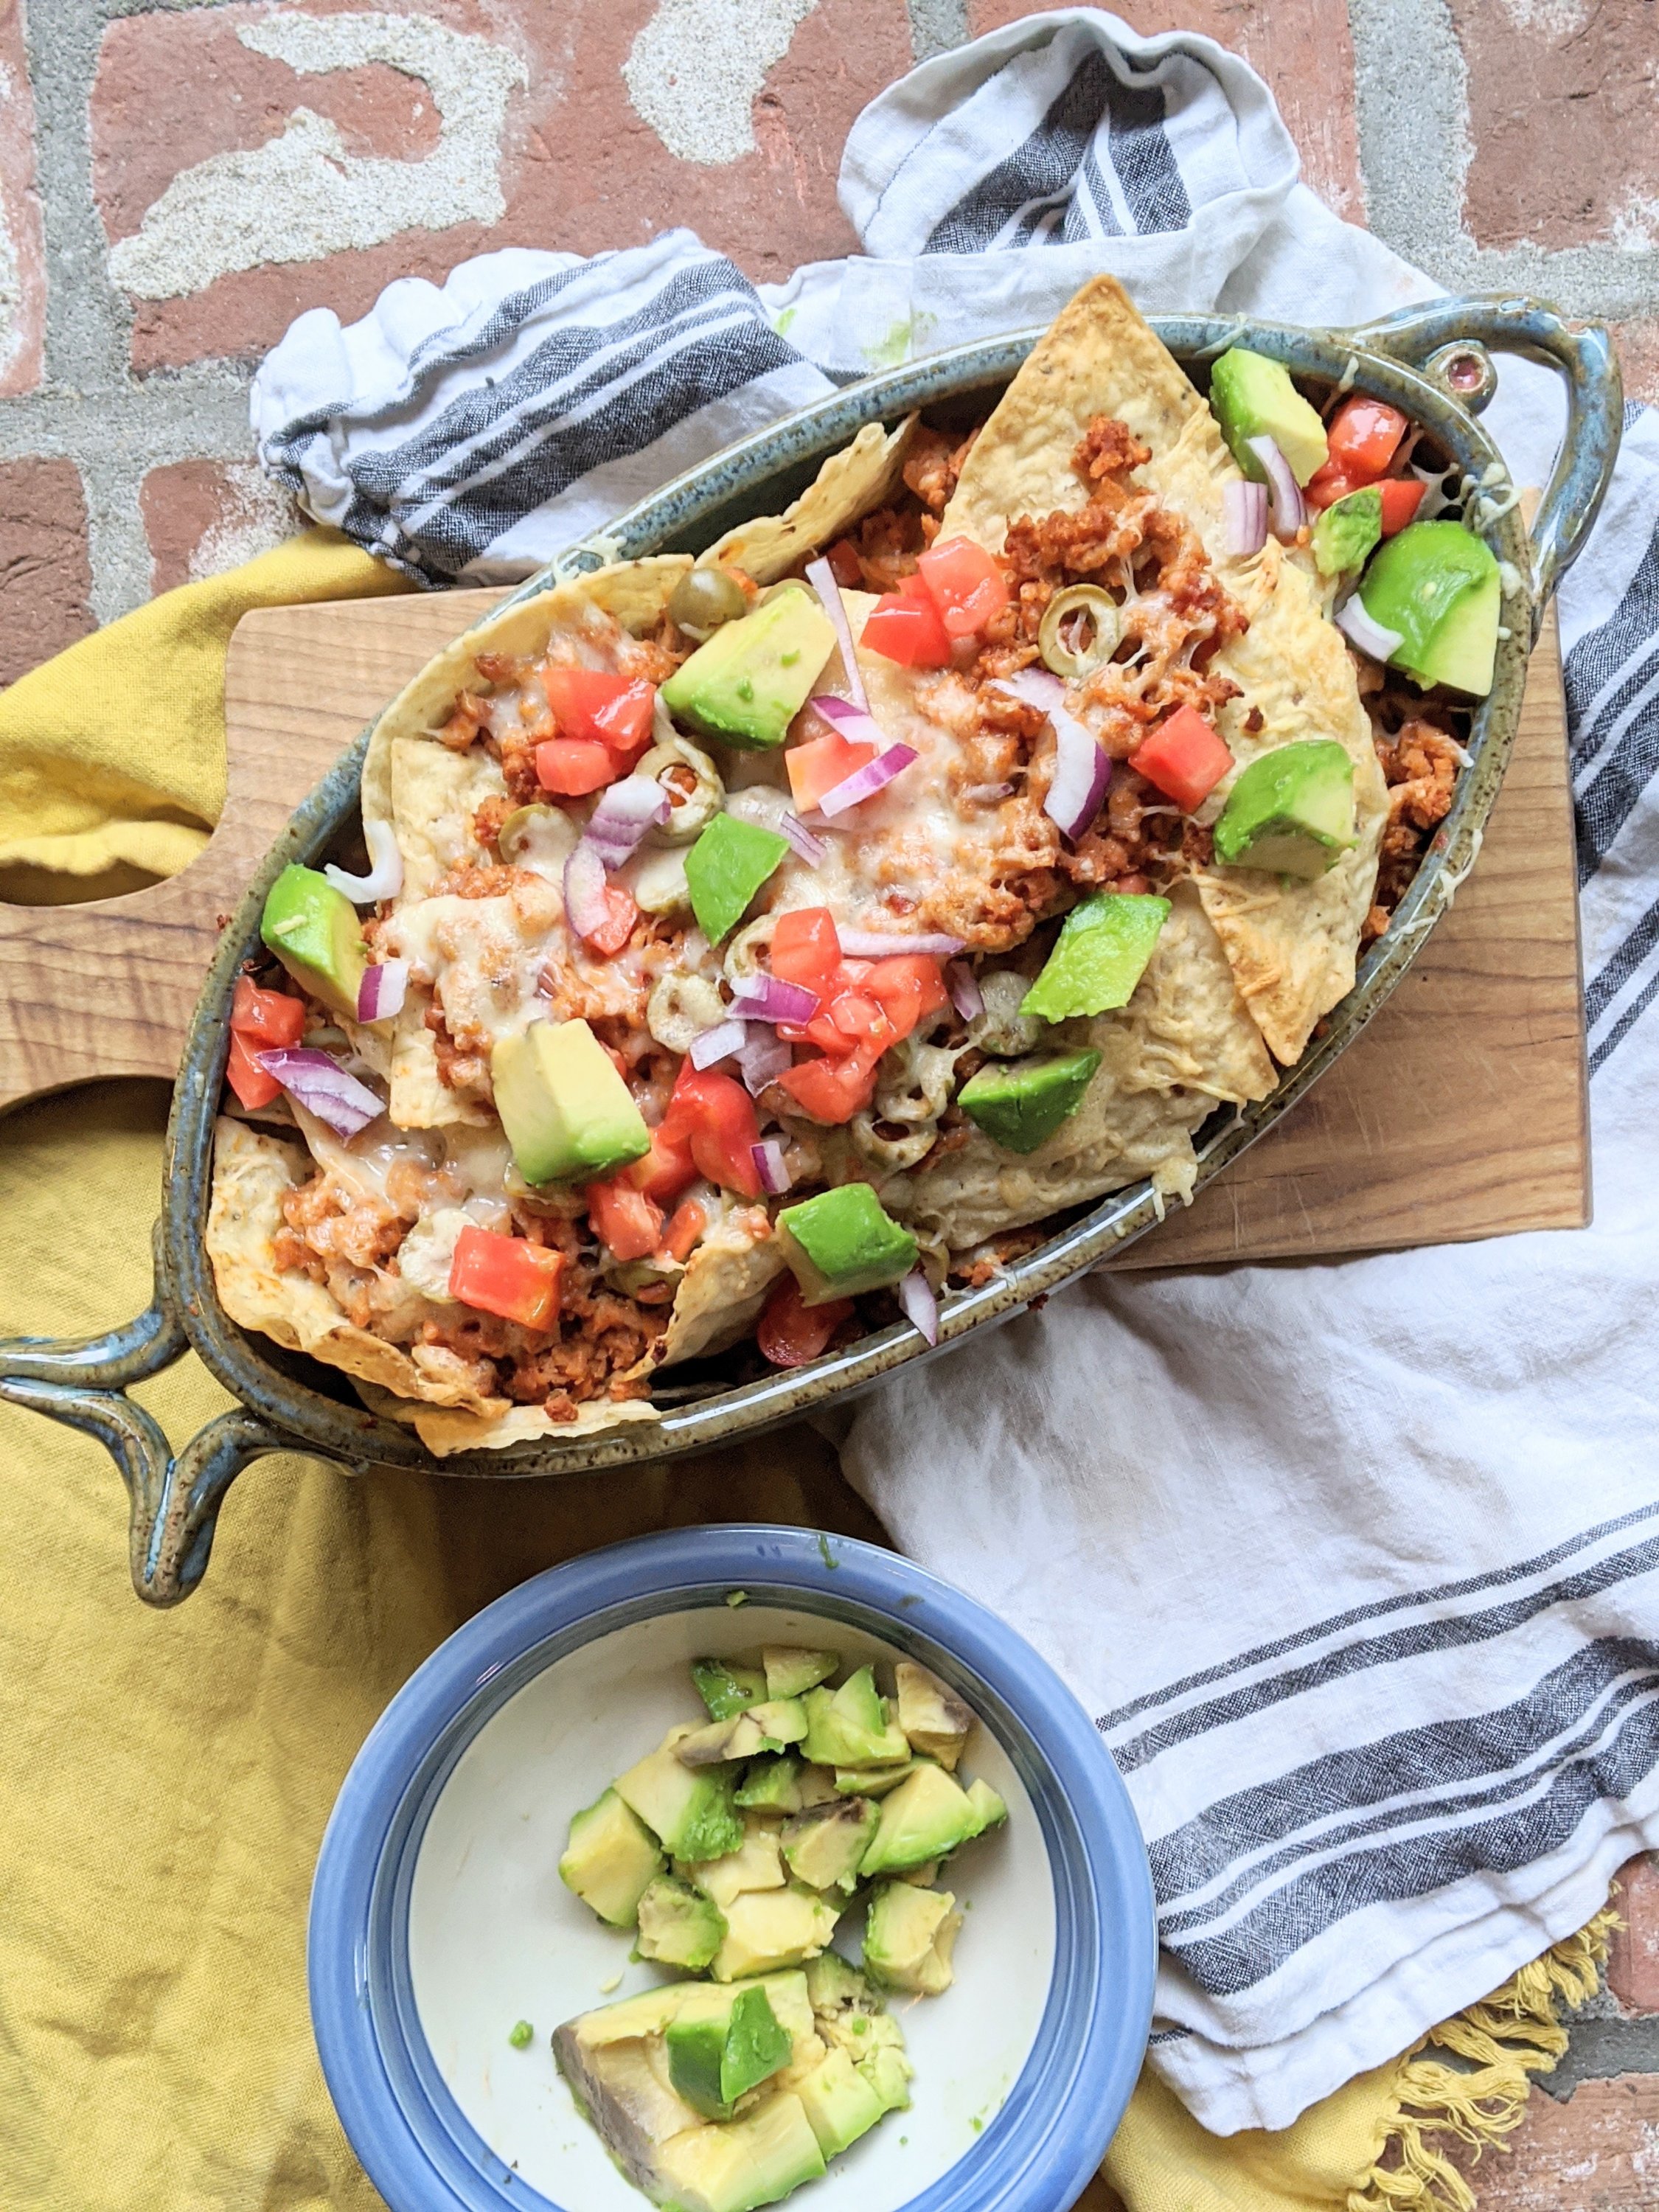 pantry nachos recipe healthy vegan gluten free corn chips taco tuesday with salsa and tortillas